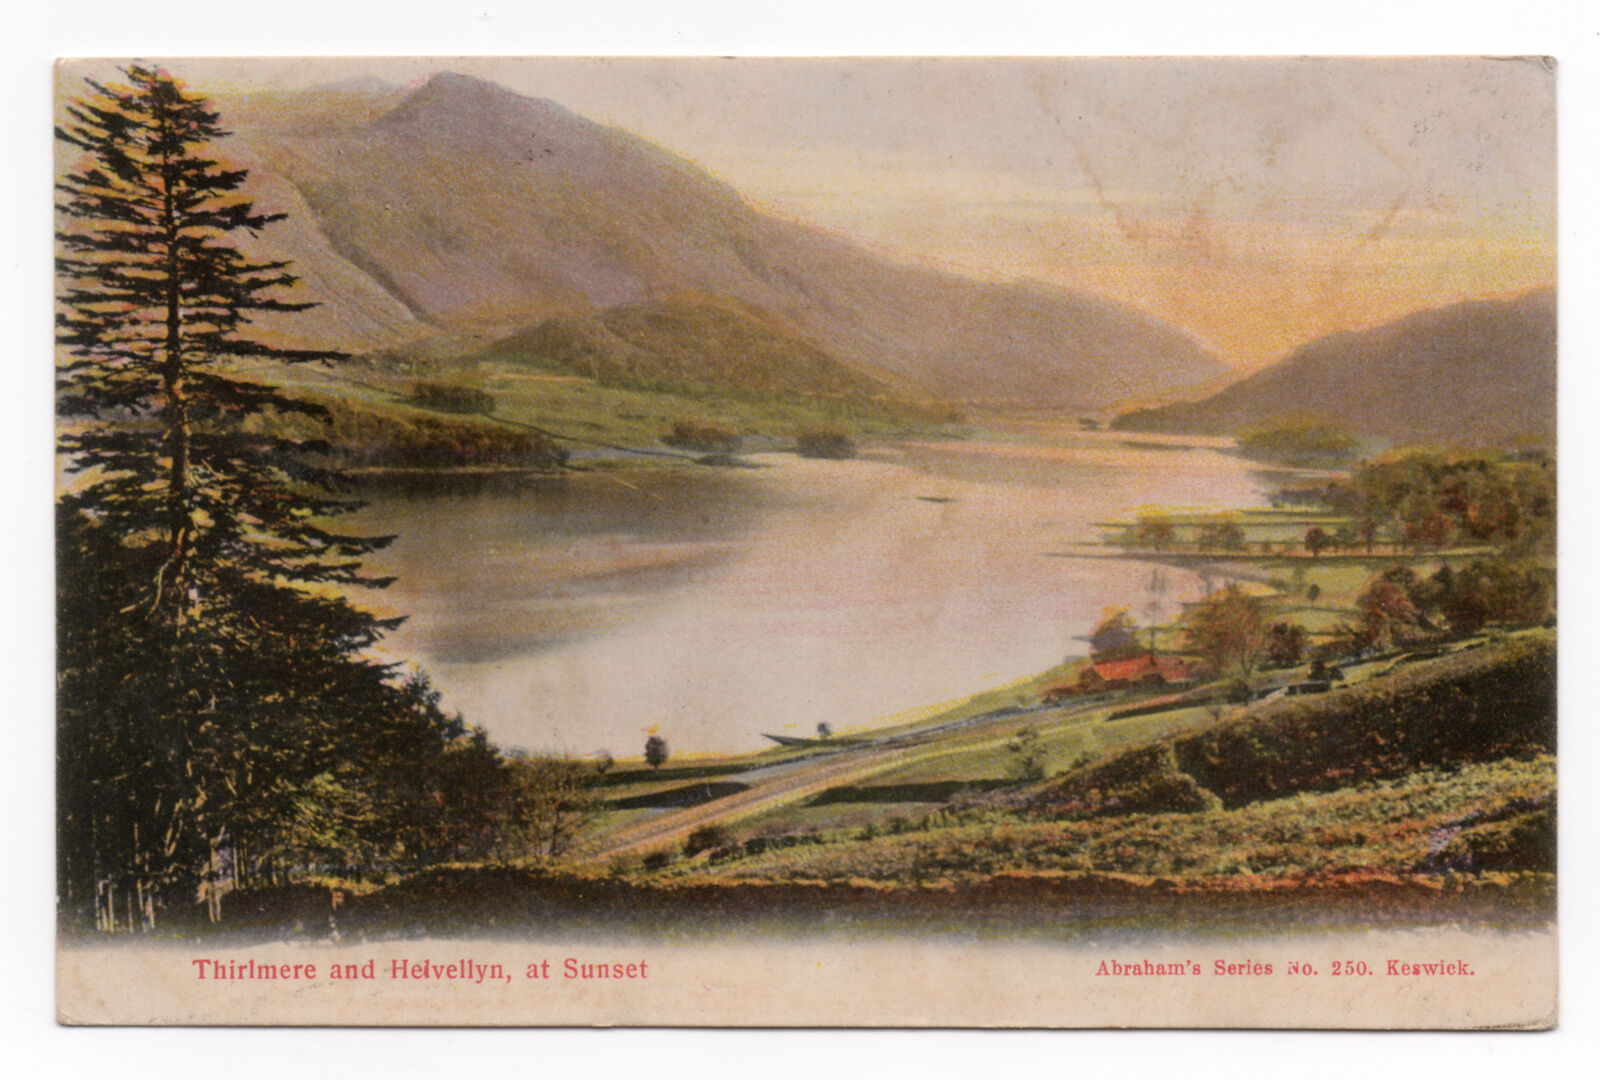 House Clearance - THIRLMERE & HELVELLYN Lake District ABRAHAM SERIES 250 Keswick CUMBRIA Service